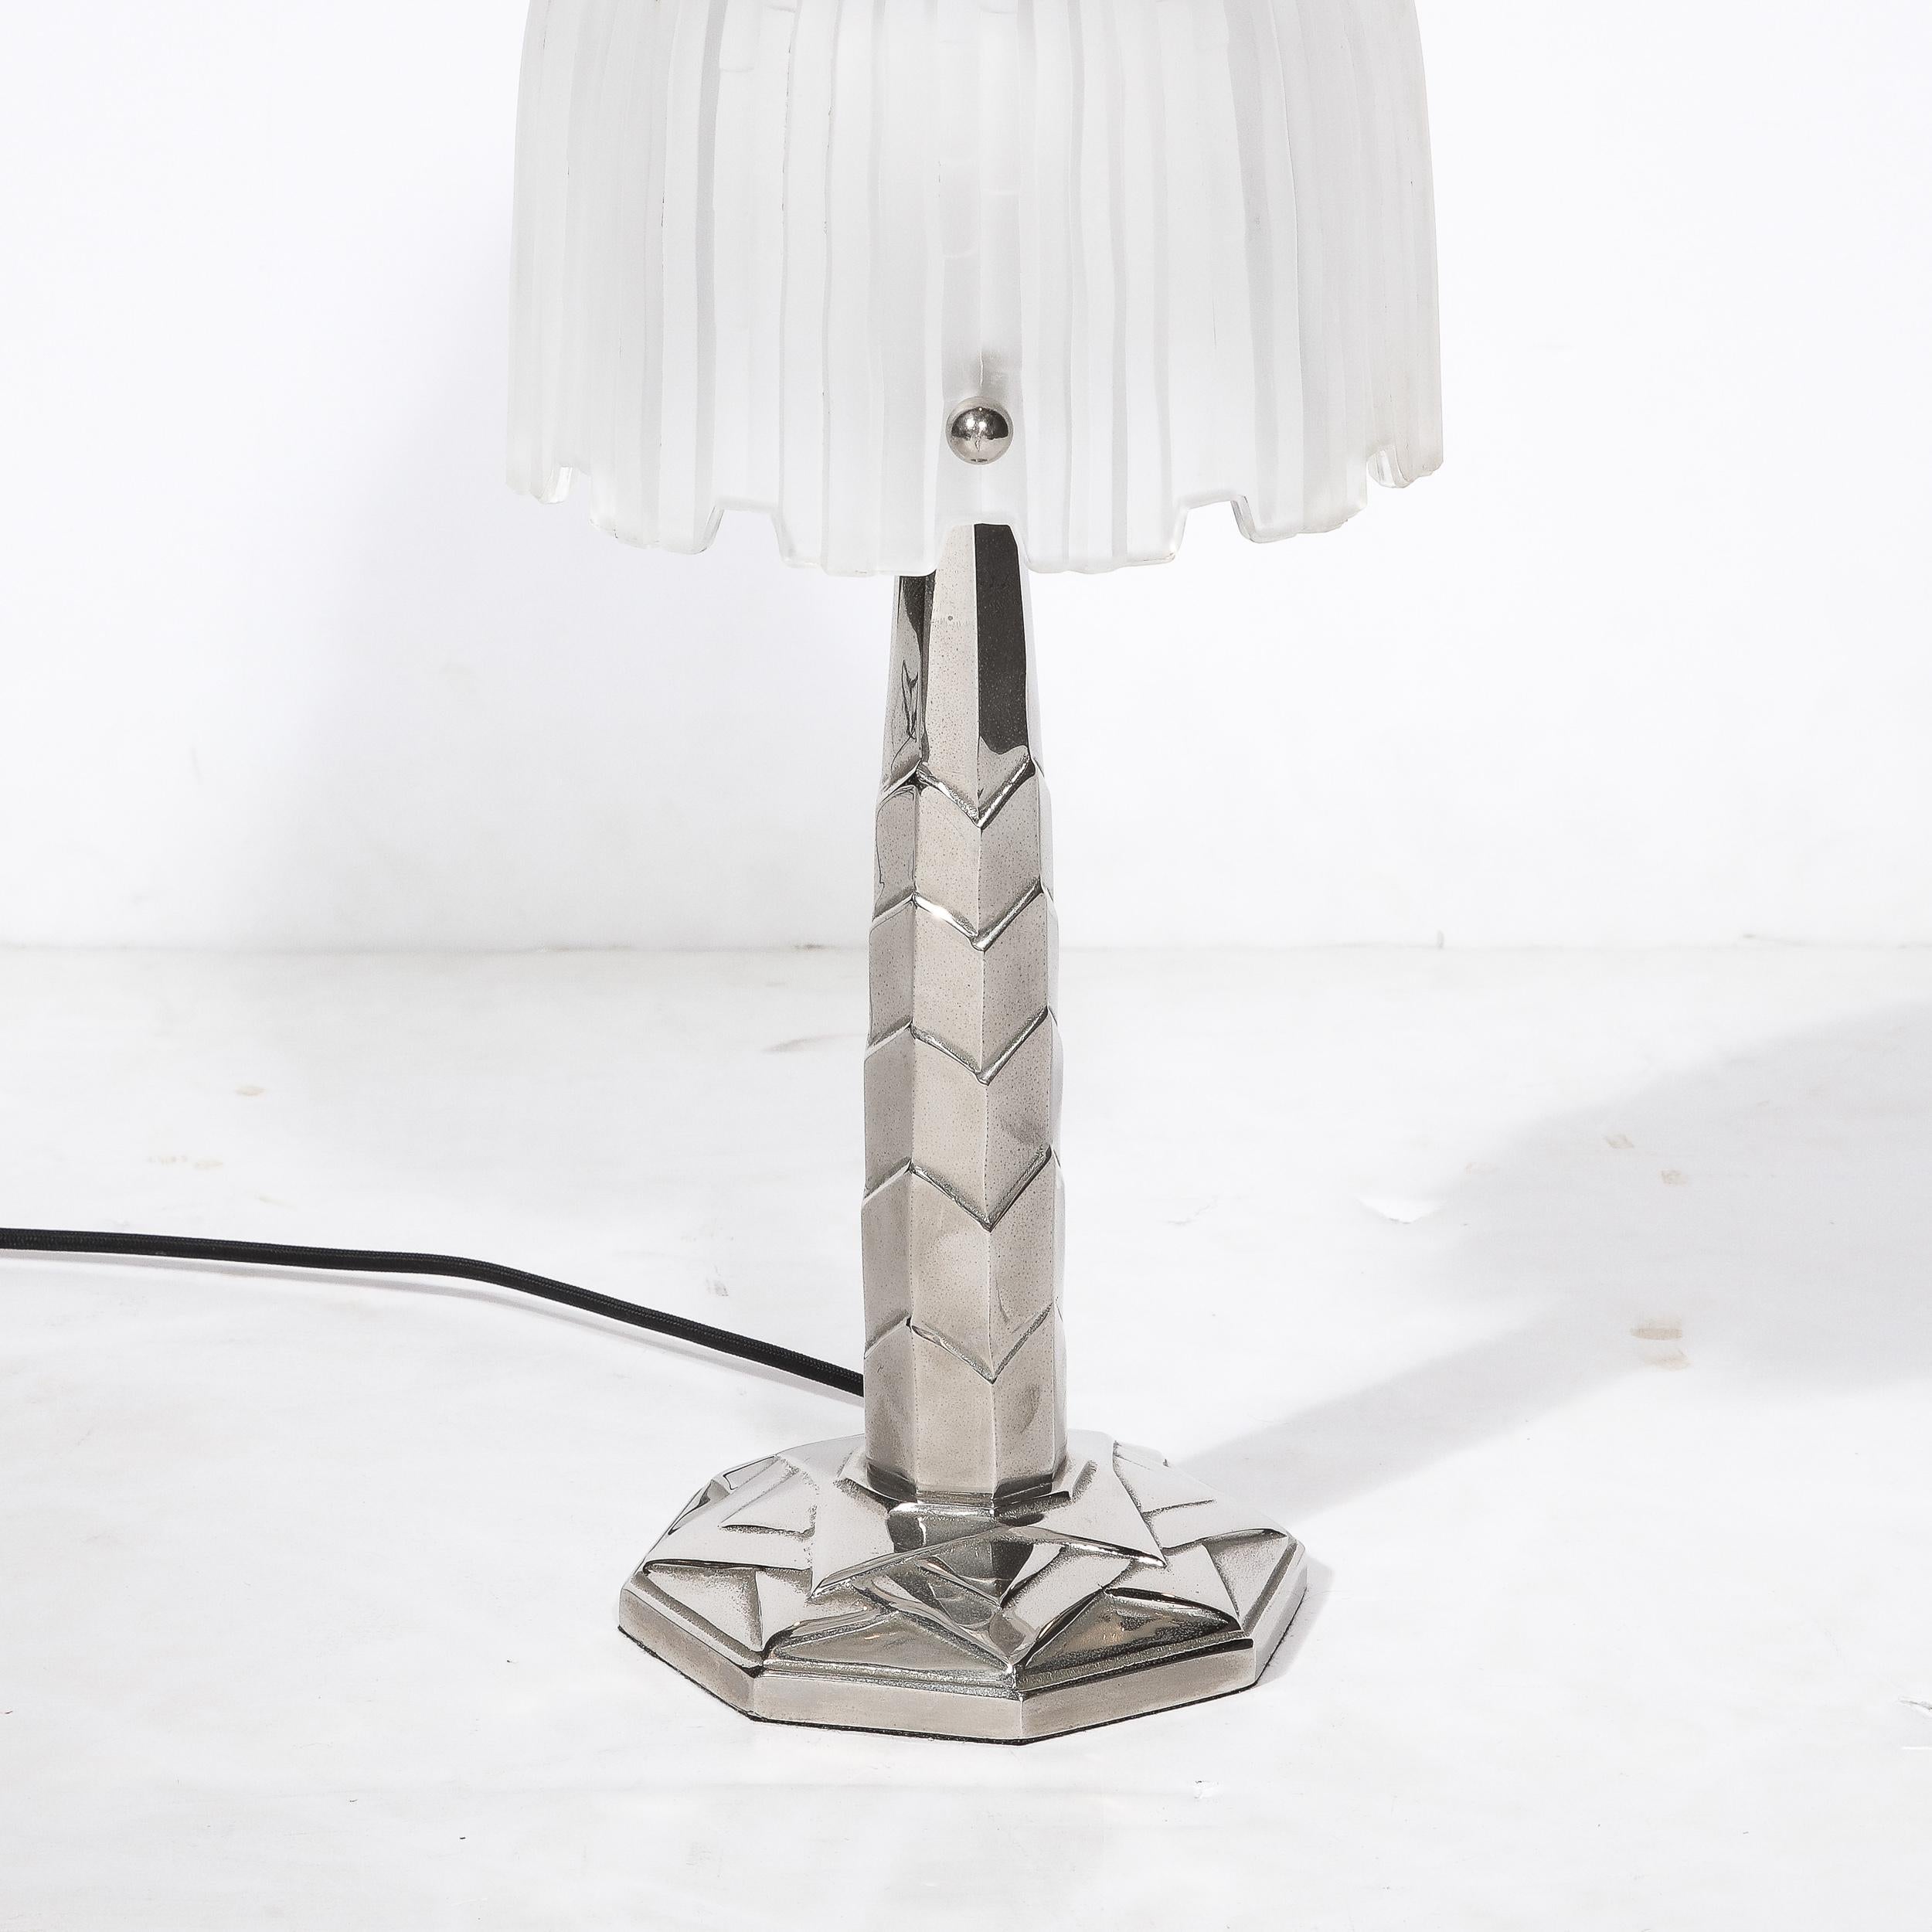 This stunning table lamp was designed by Marius-Ernest Sabino in France, Circa 1930. An industrial designer known for his futuristic, angular and geometric designs. The Lamp is signed Sabino, who was a French artist who worked with glass and all